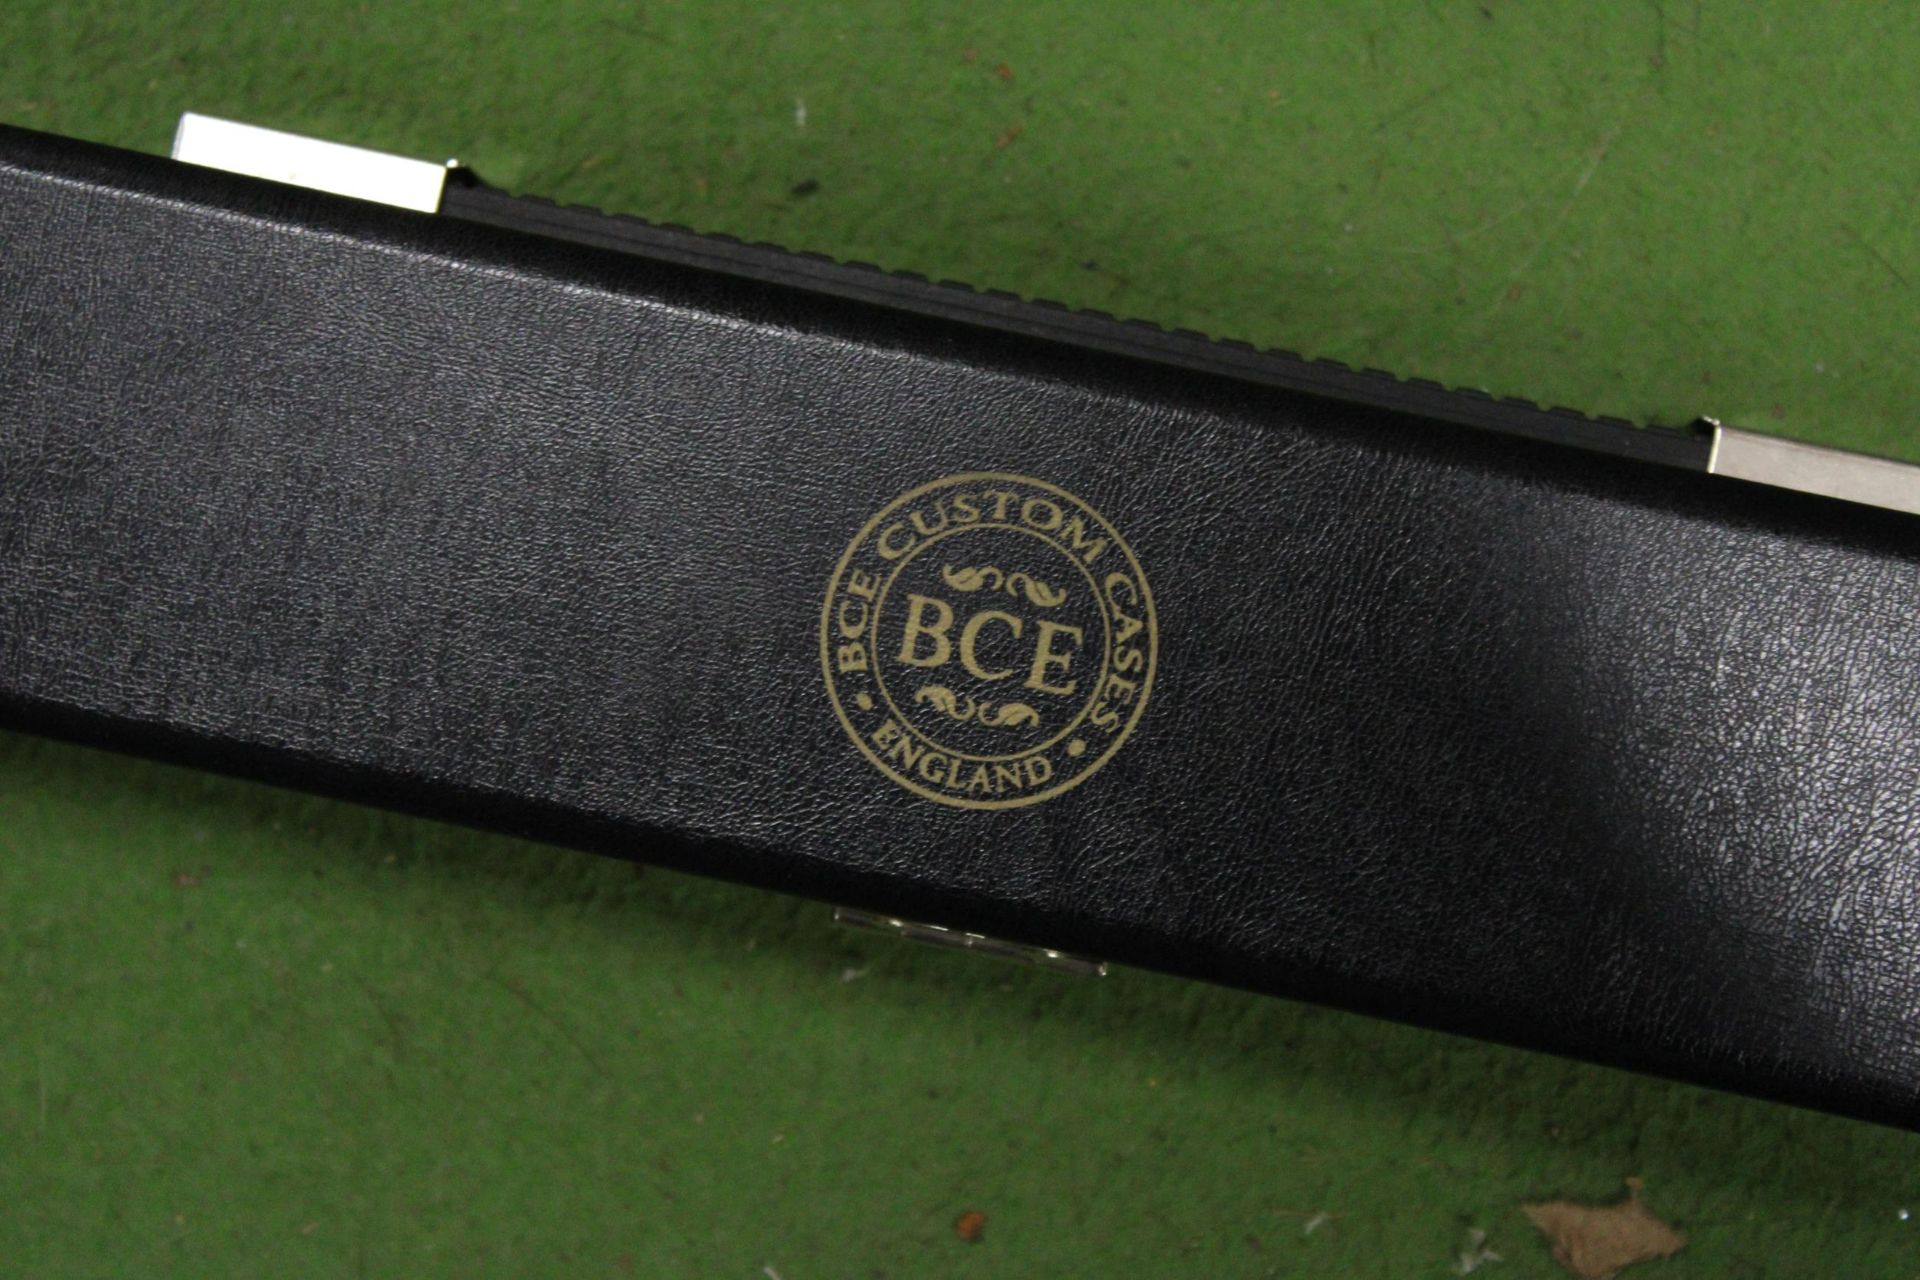 A STINGER DE LUX POOL CUE IN A HARD CASE - Image 6 of 6